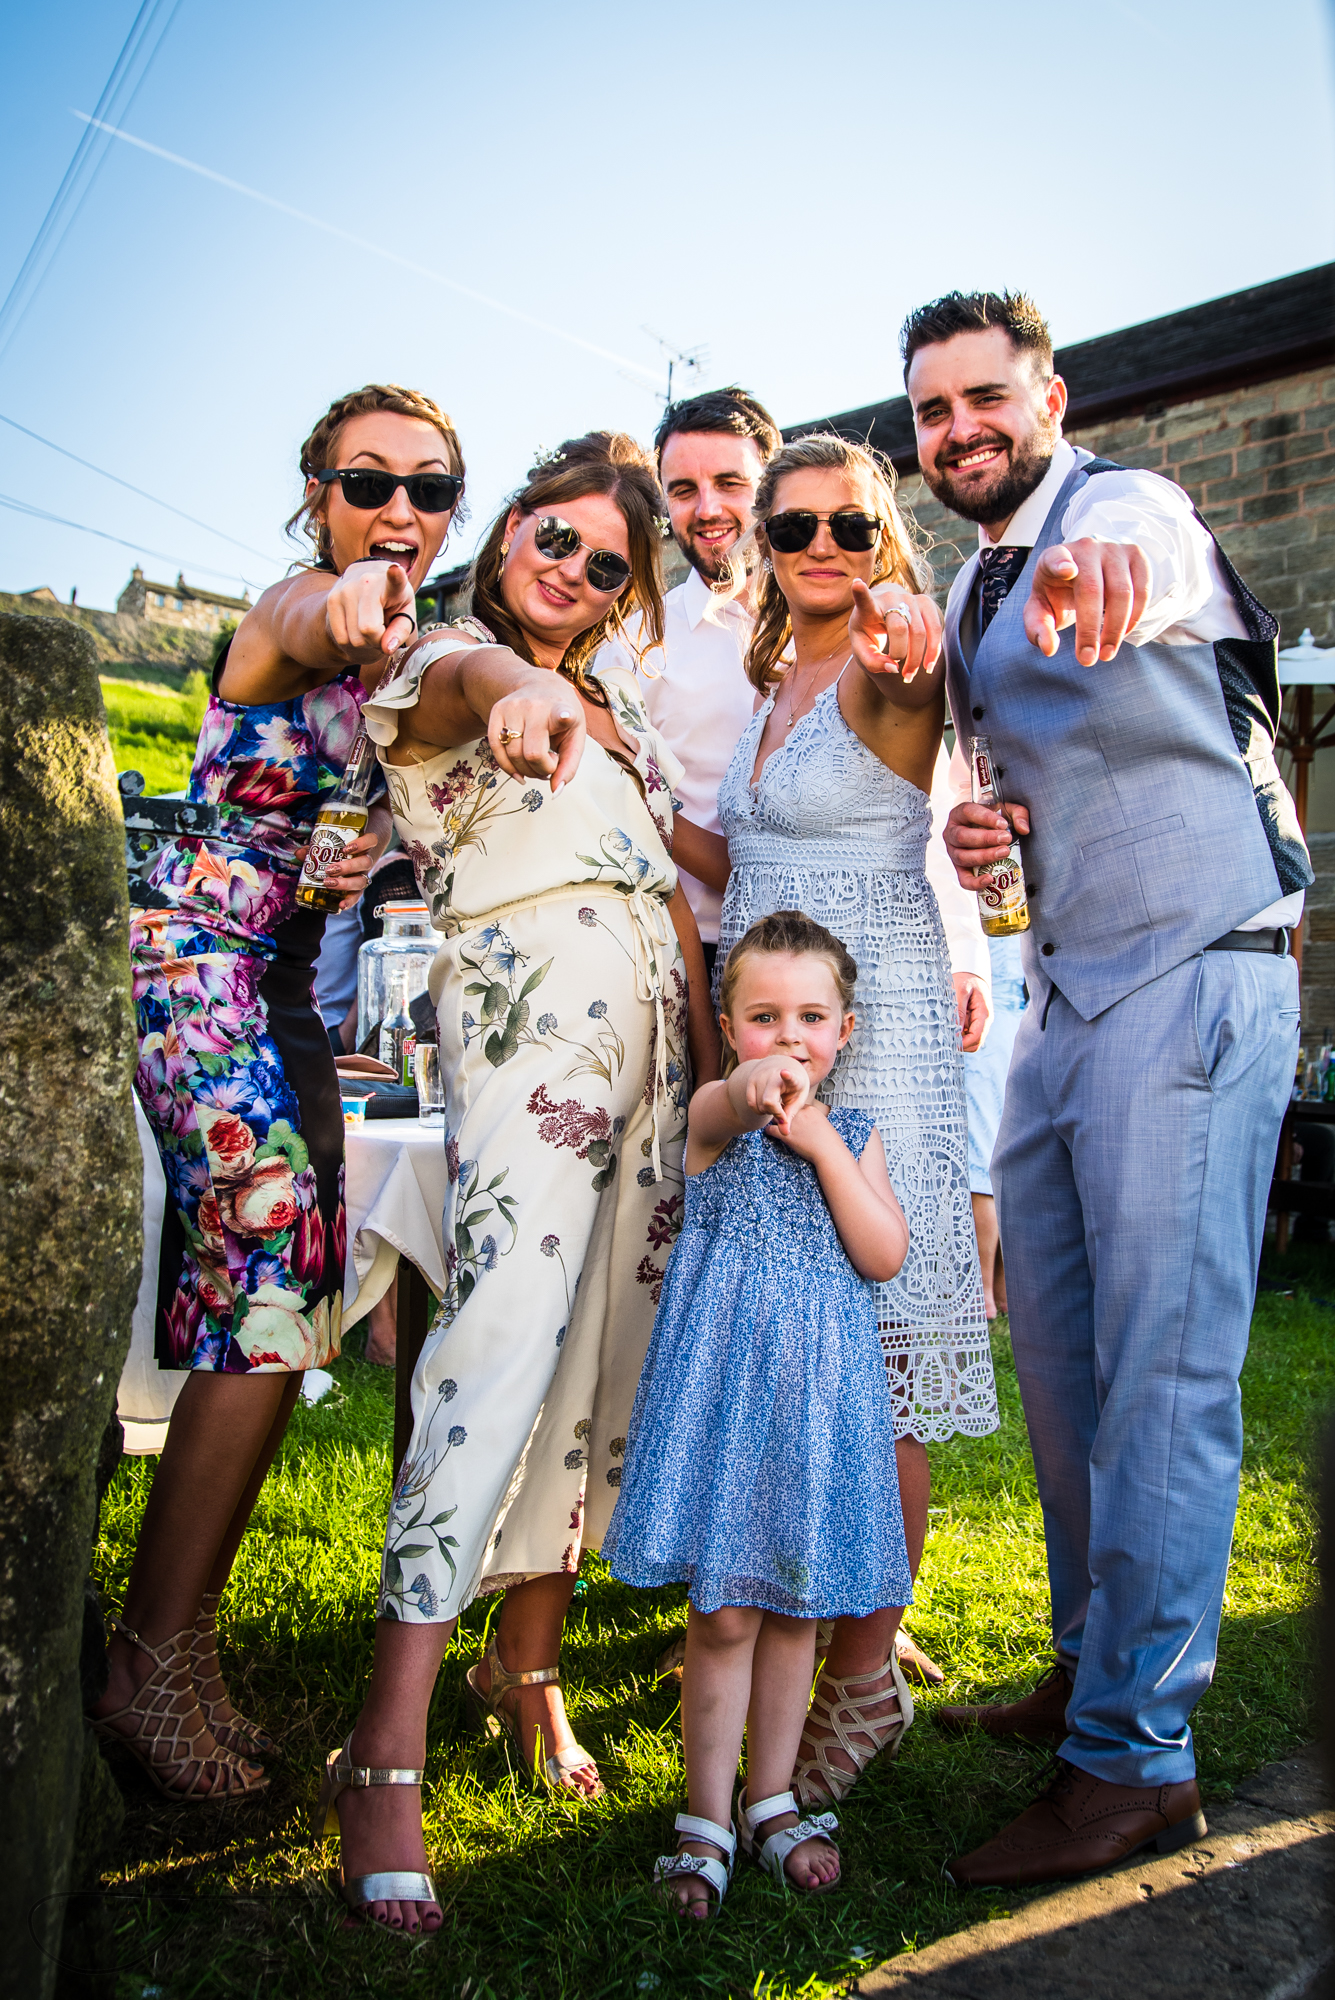 Six wedding guests pose together for a funny photo together, they are dressed in really bright summer wedding clothes